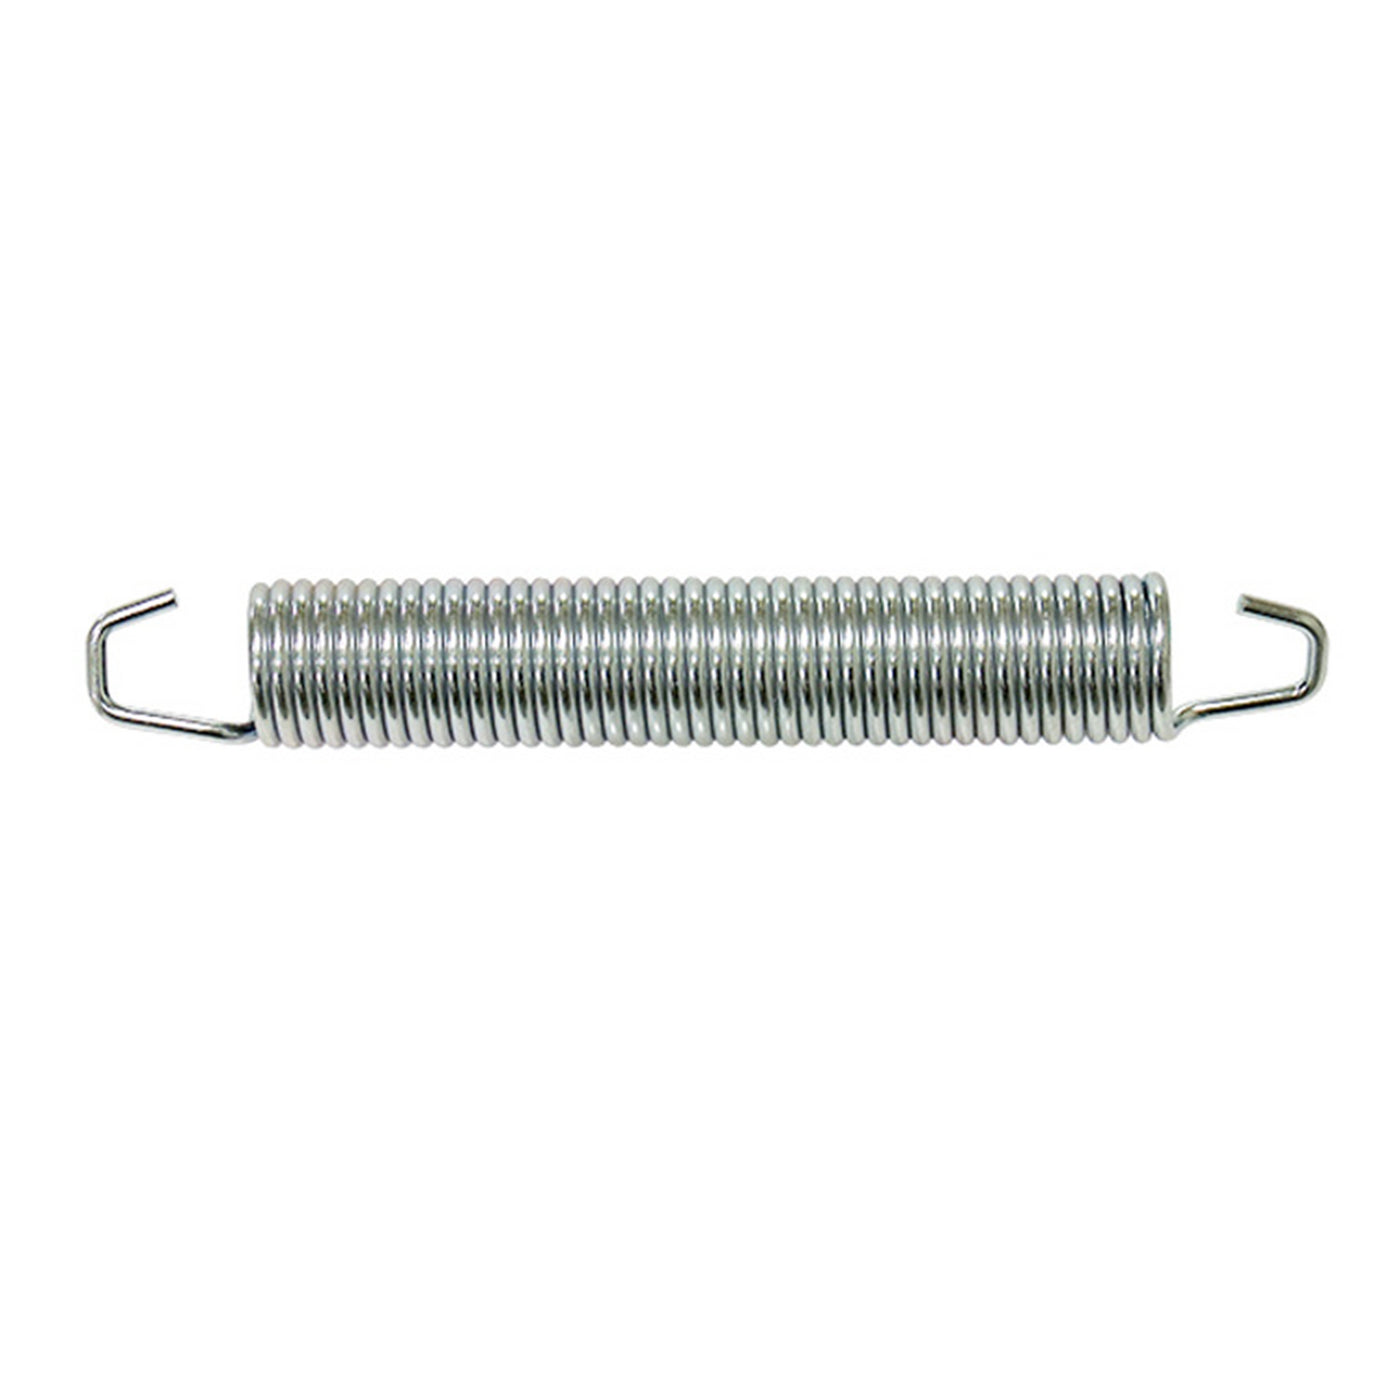 EXHAUST SPRING#mpn_02-107-03